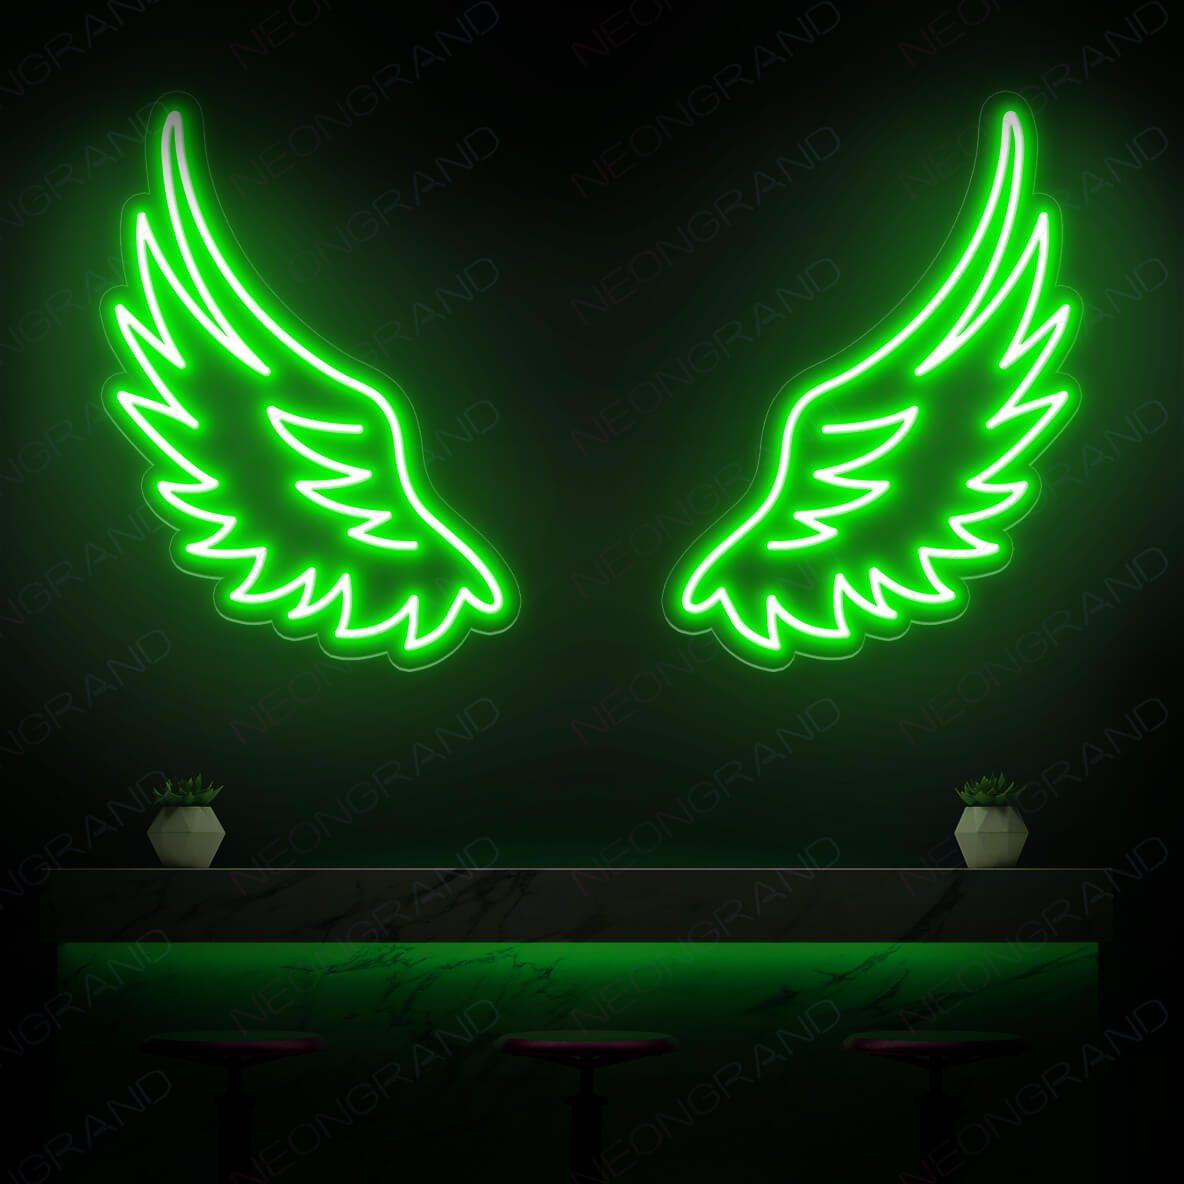 Angel Wings Neon Sign Led Light Bar Neon Signs Green